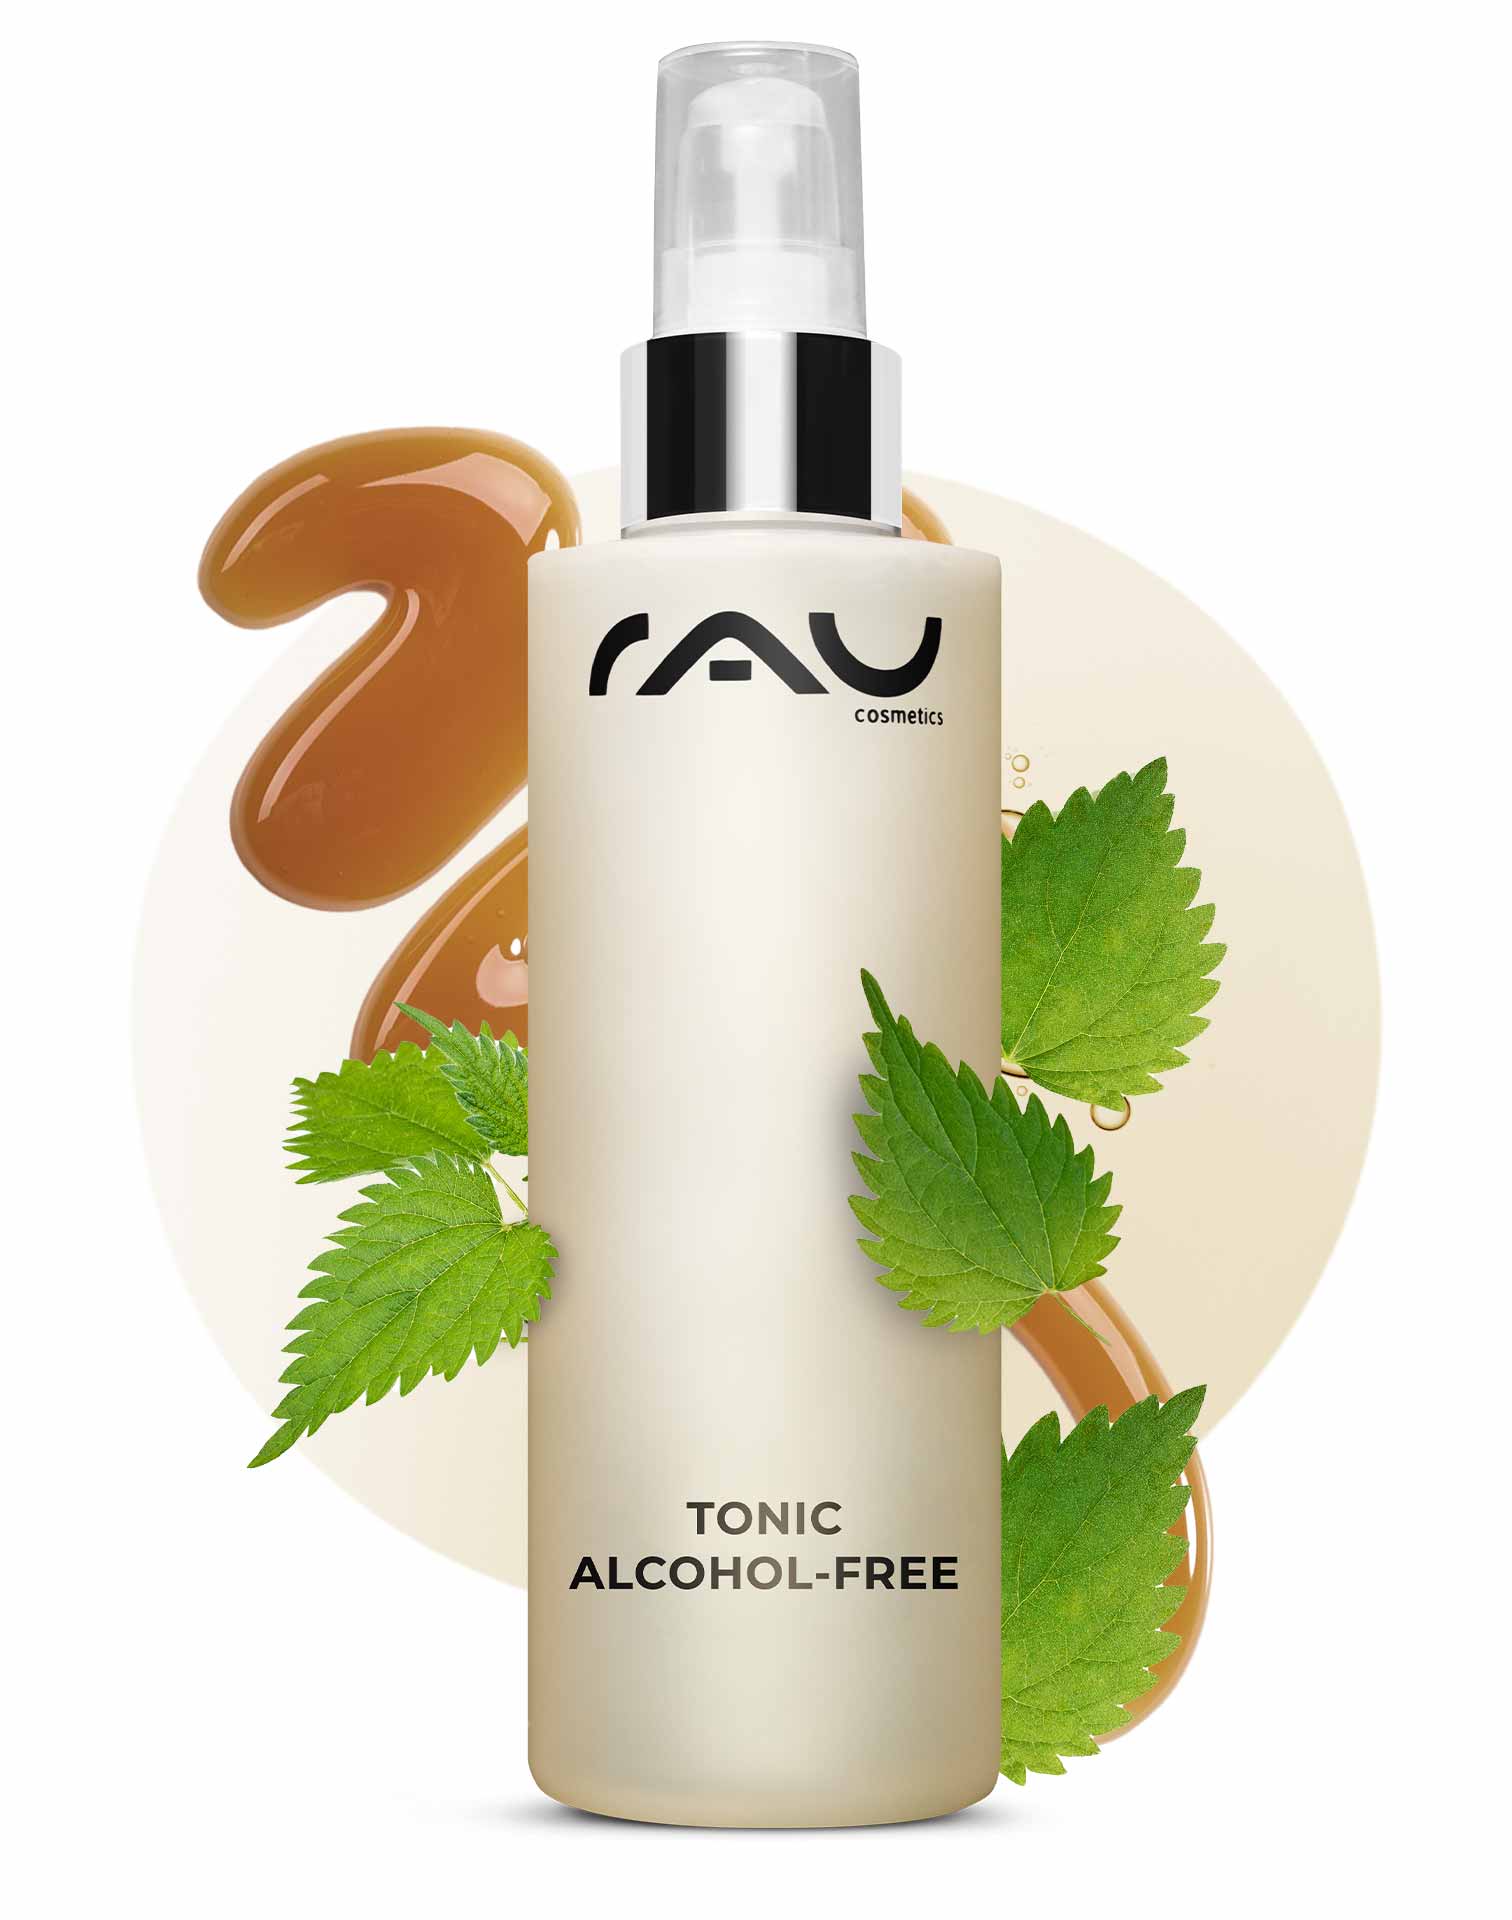 RAU Tonic alcohol-free 200 ml - Facial Toner with Nettle Extract